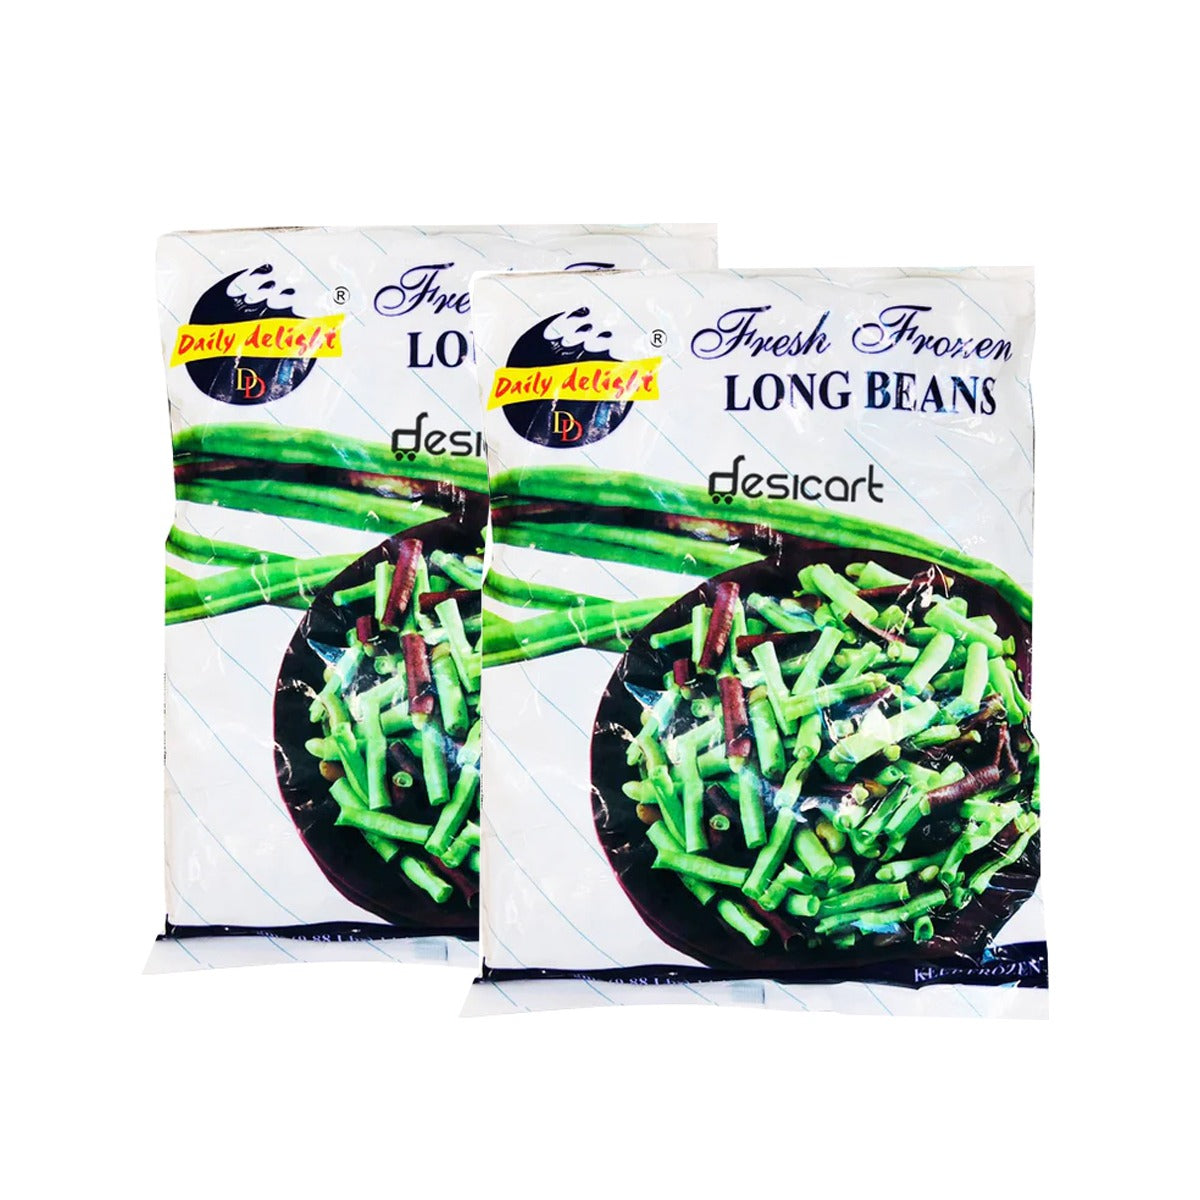 DAILY DELIGHT LONG BEANS 400G (PACK OF 2)